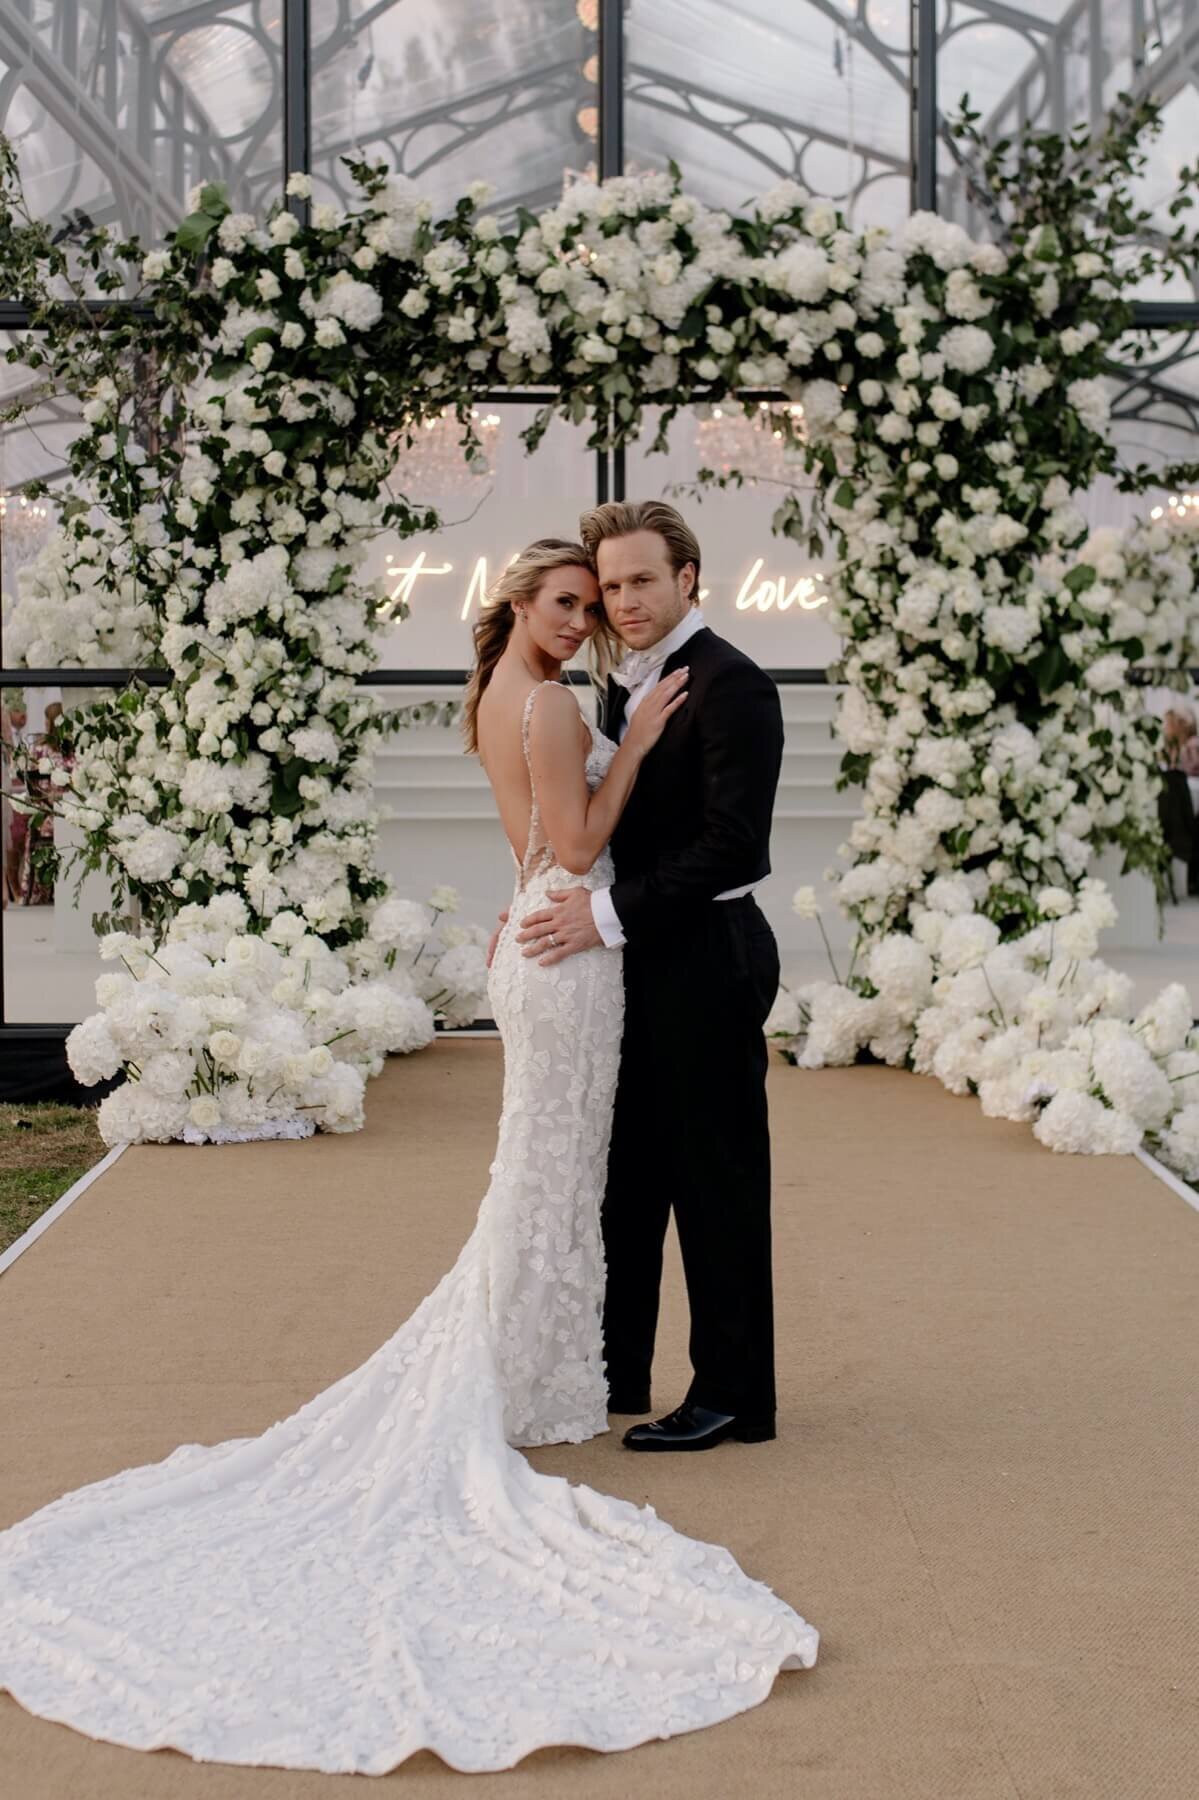 Amelia and Olly Murs in front of their glass wedding marquee with a stunning floral arch entrance.